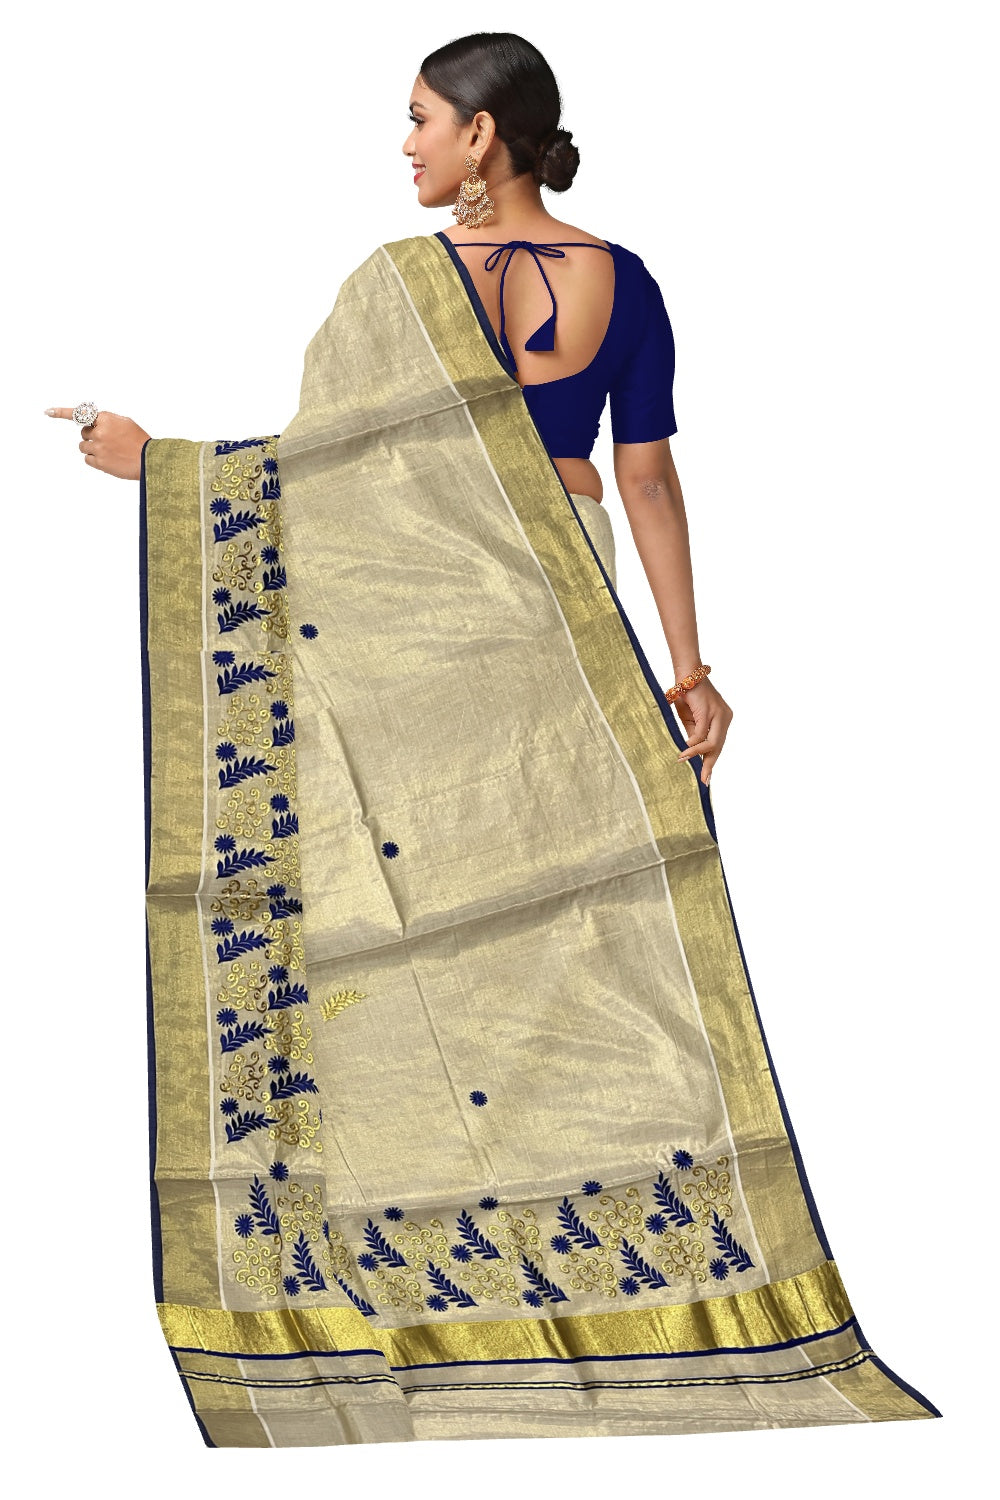 Kerala Tissue Kasavu Heavy Work Saree with Golden and Blue Floral Embroidery Design